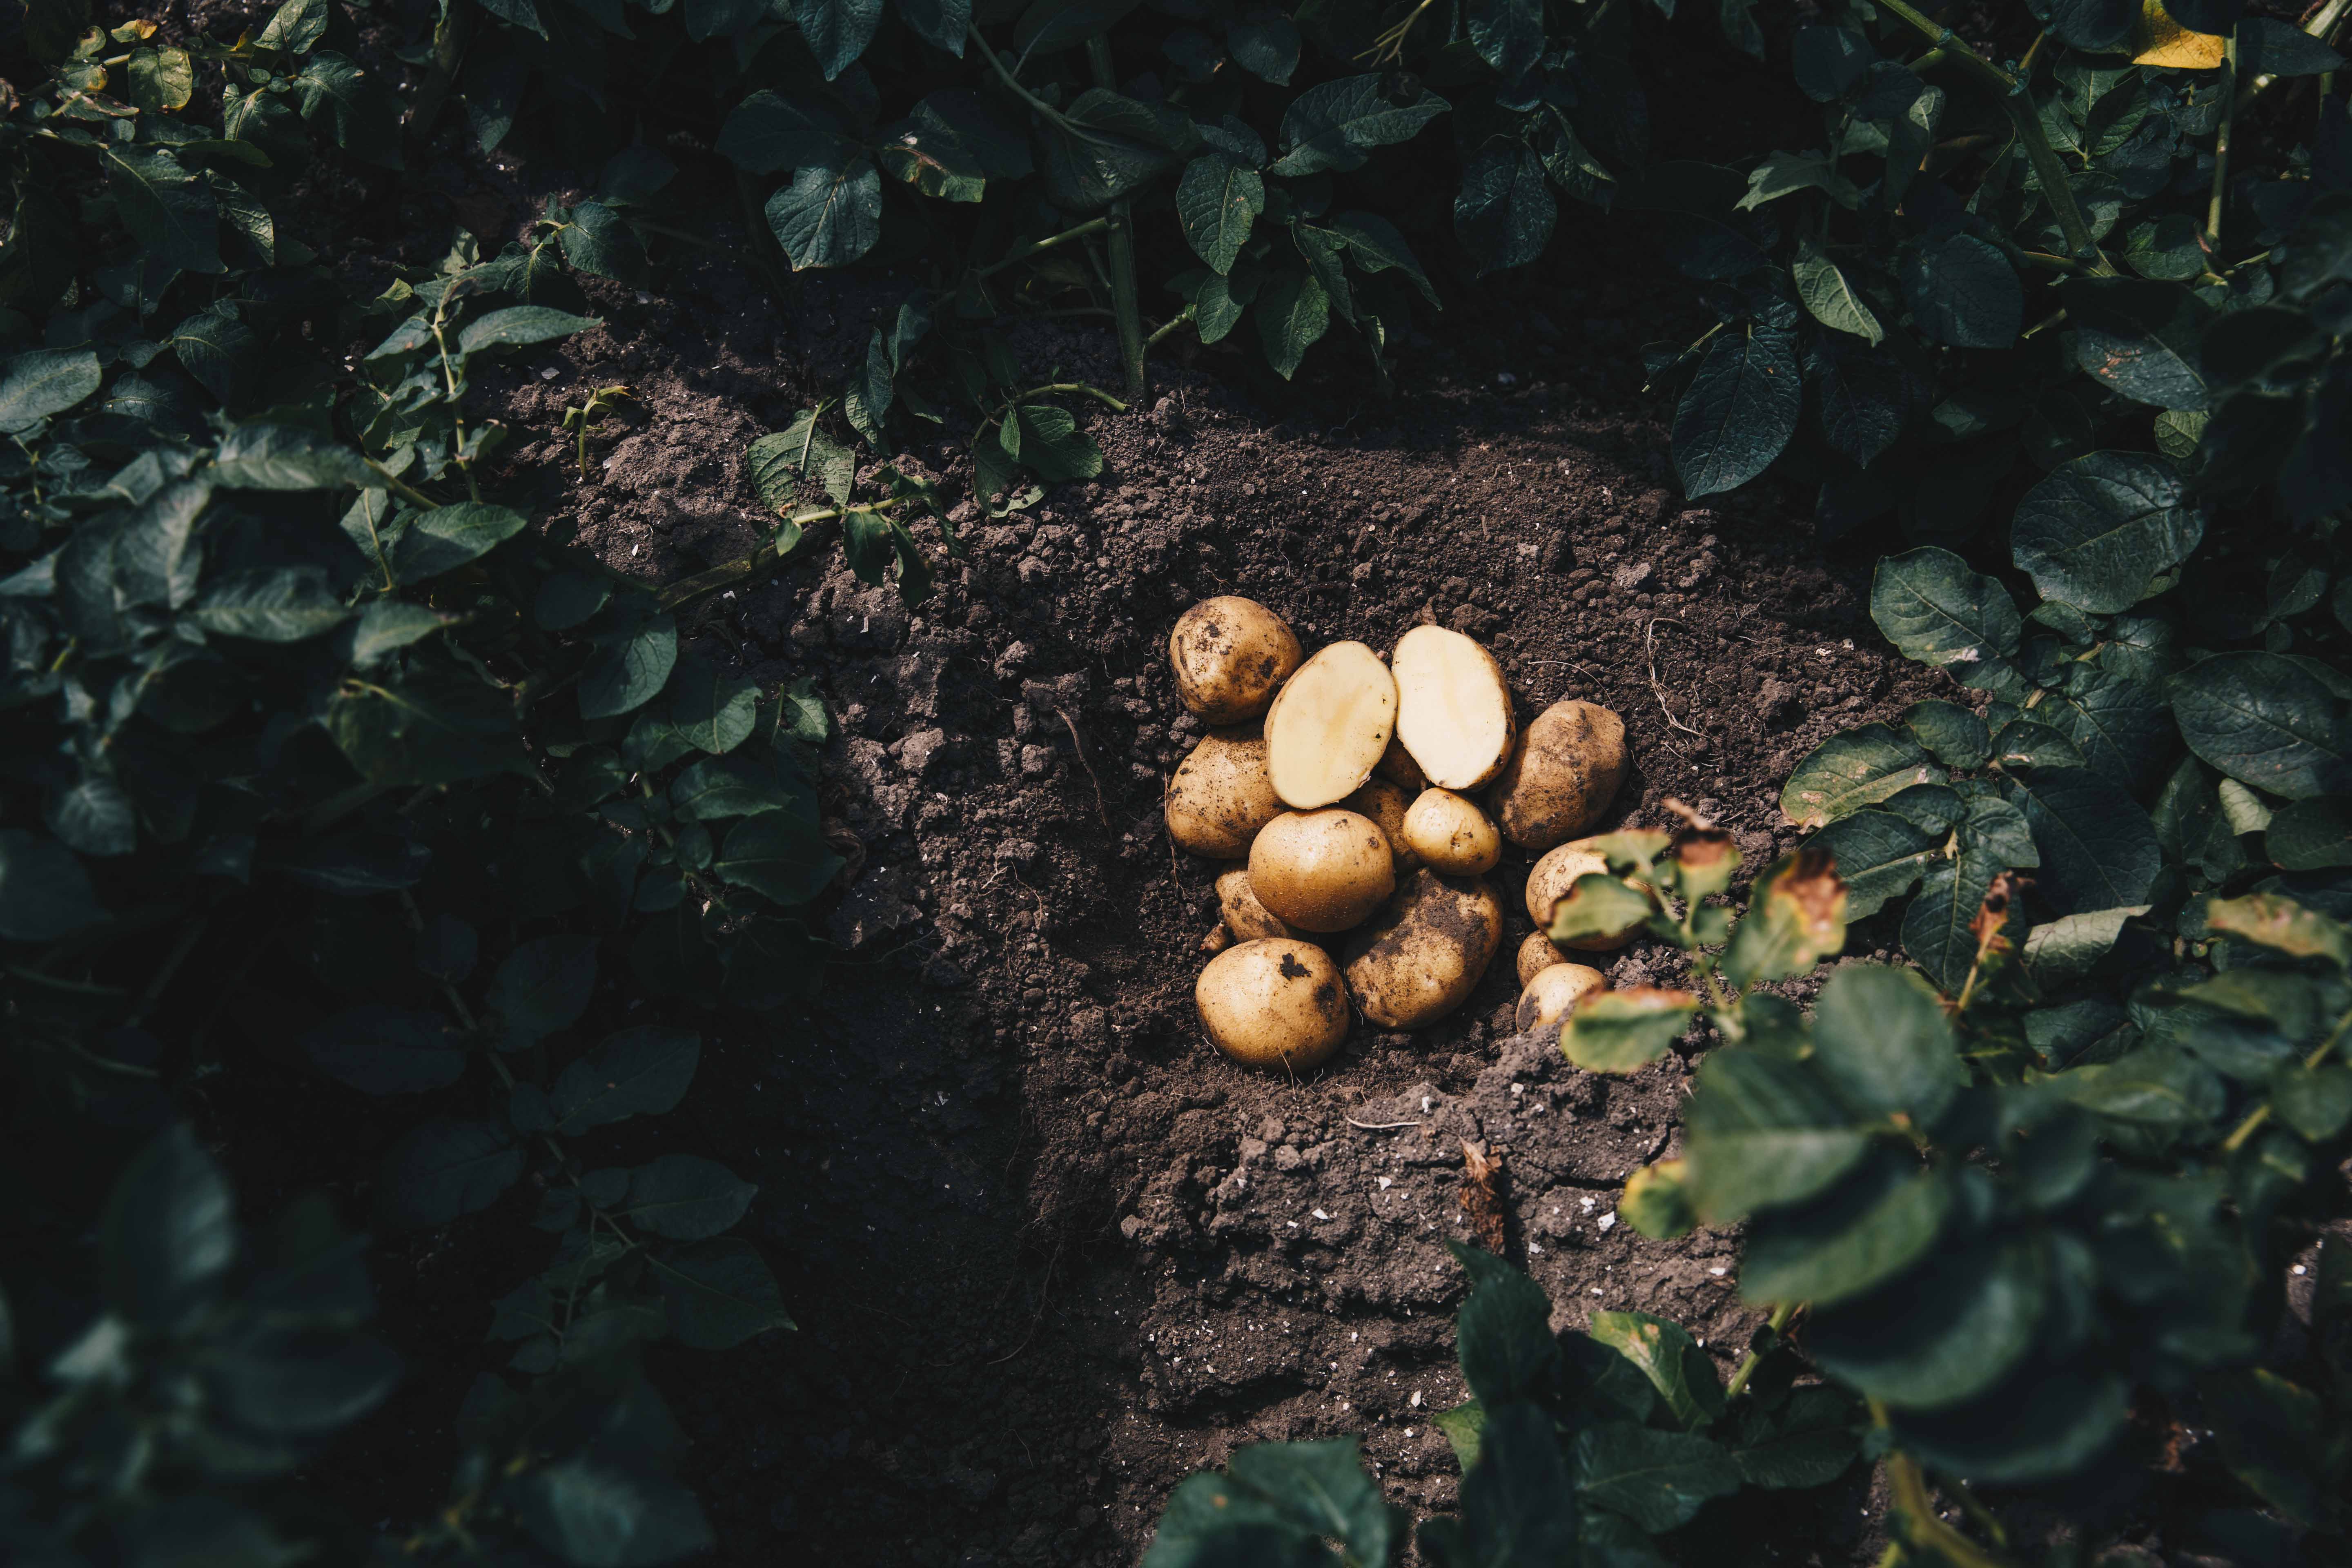 Potatoes are among the world's most important foodstuffs